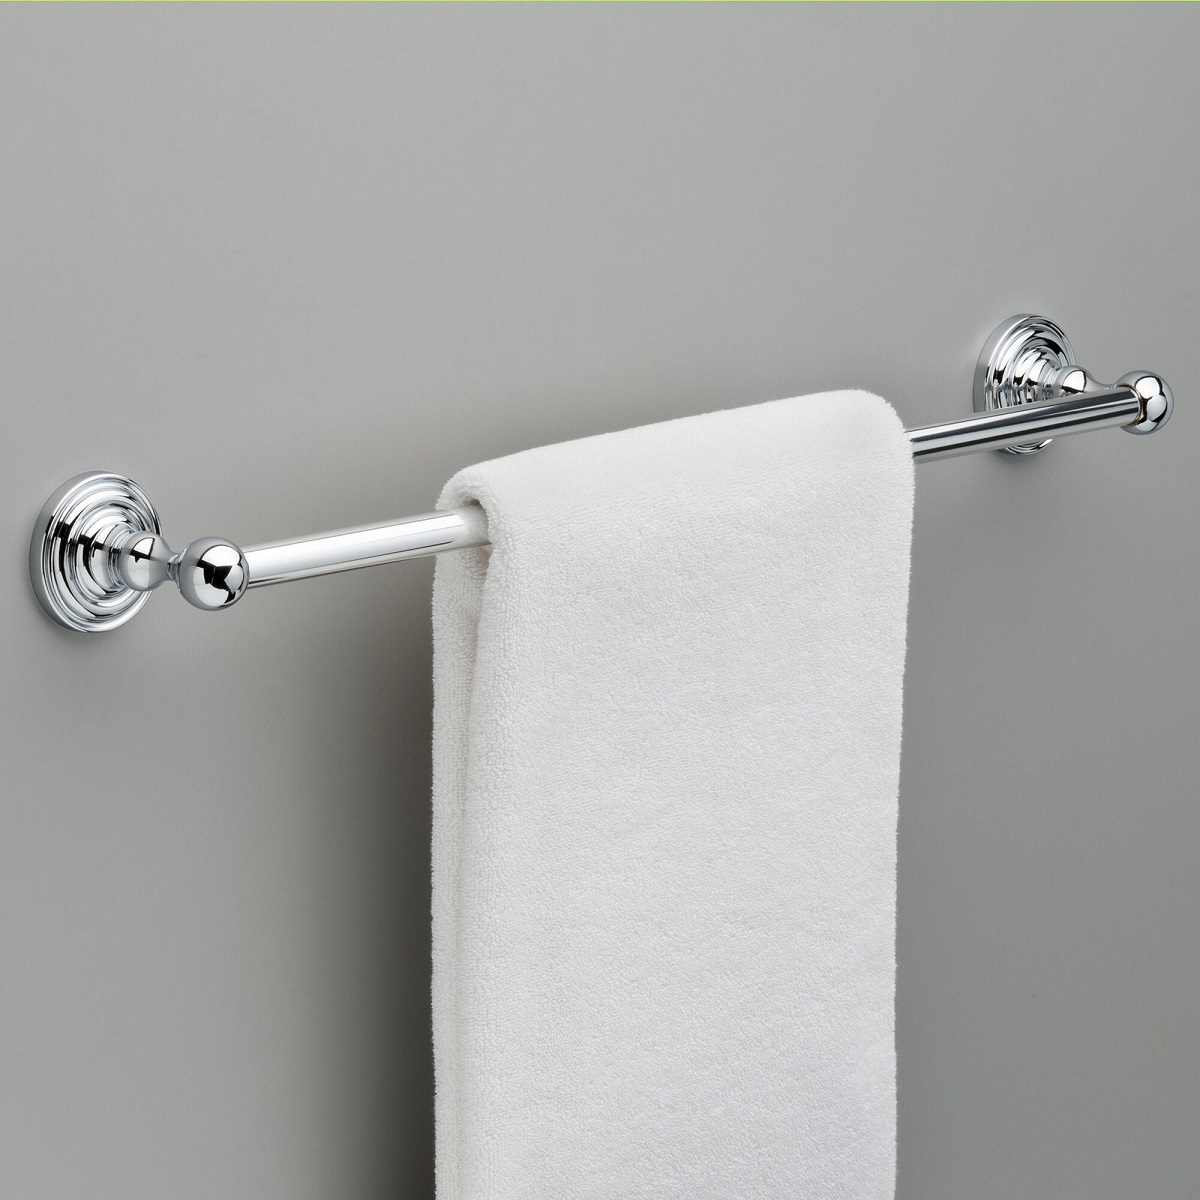 How To Pack The Greenwich Towel Bar Back In The Box